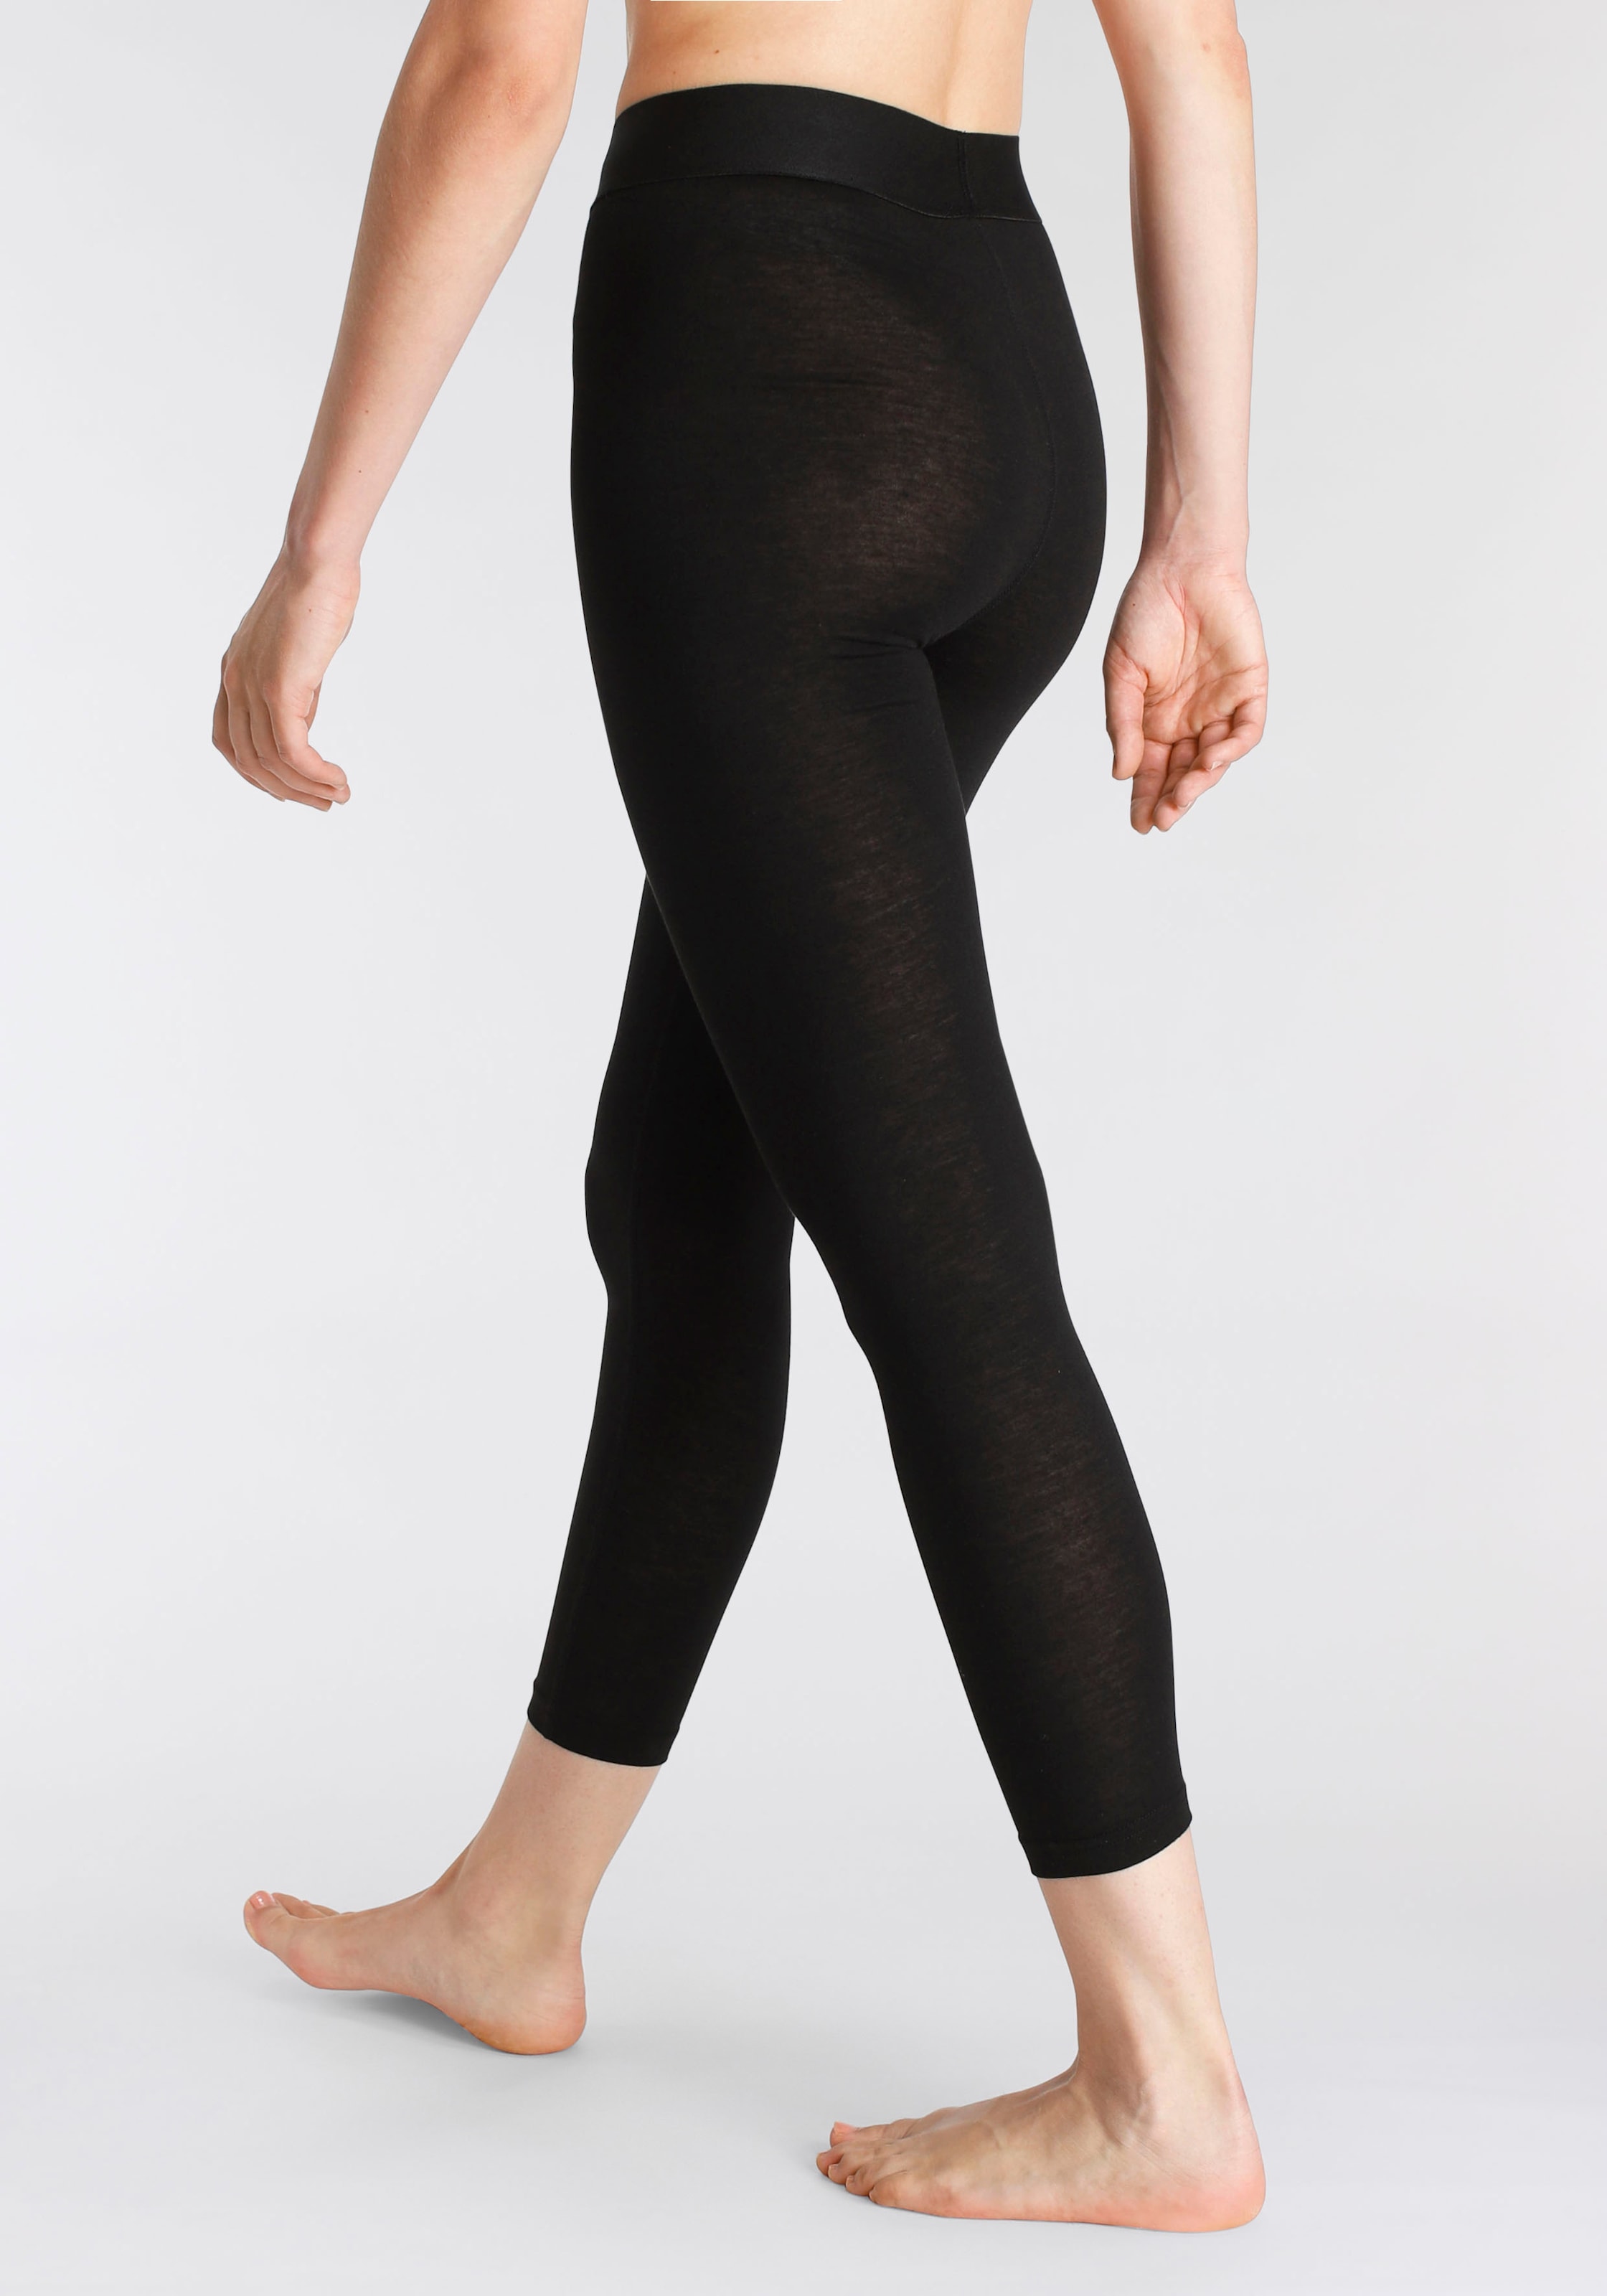 LASCANA ACTIVE Leggings, in angenehmer Wollqualität